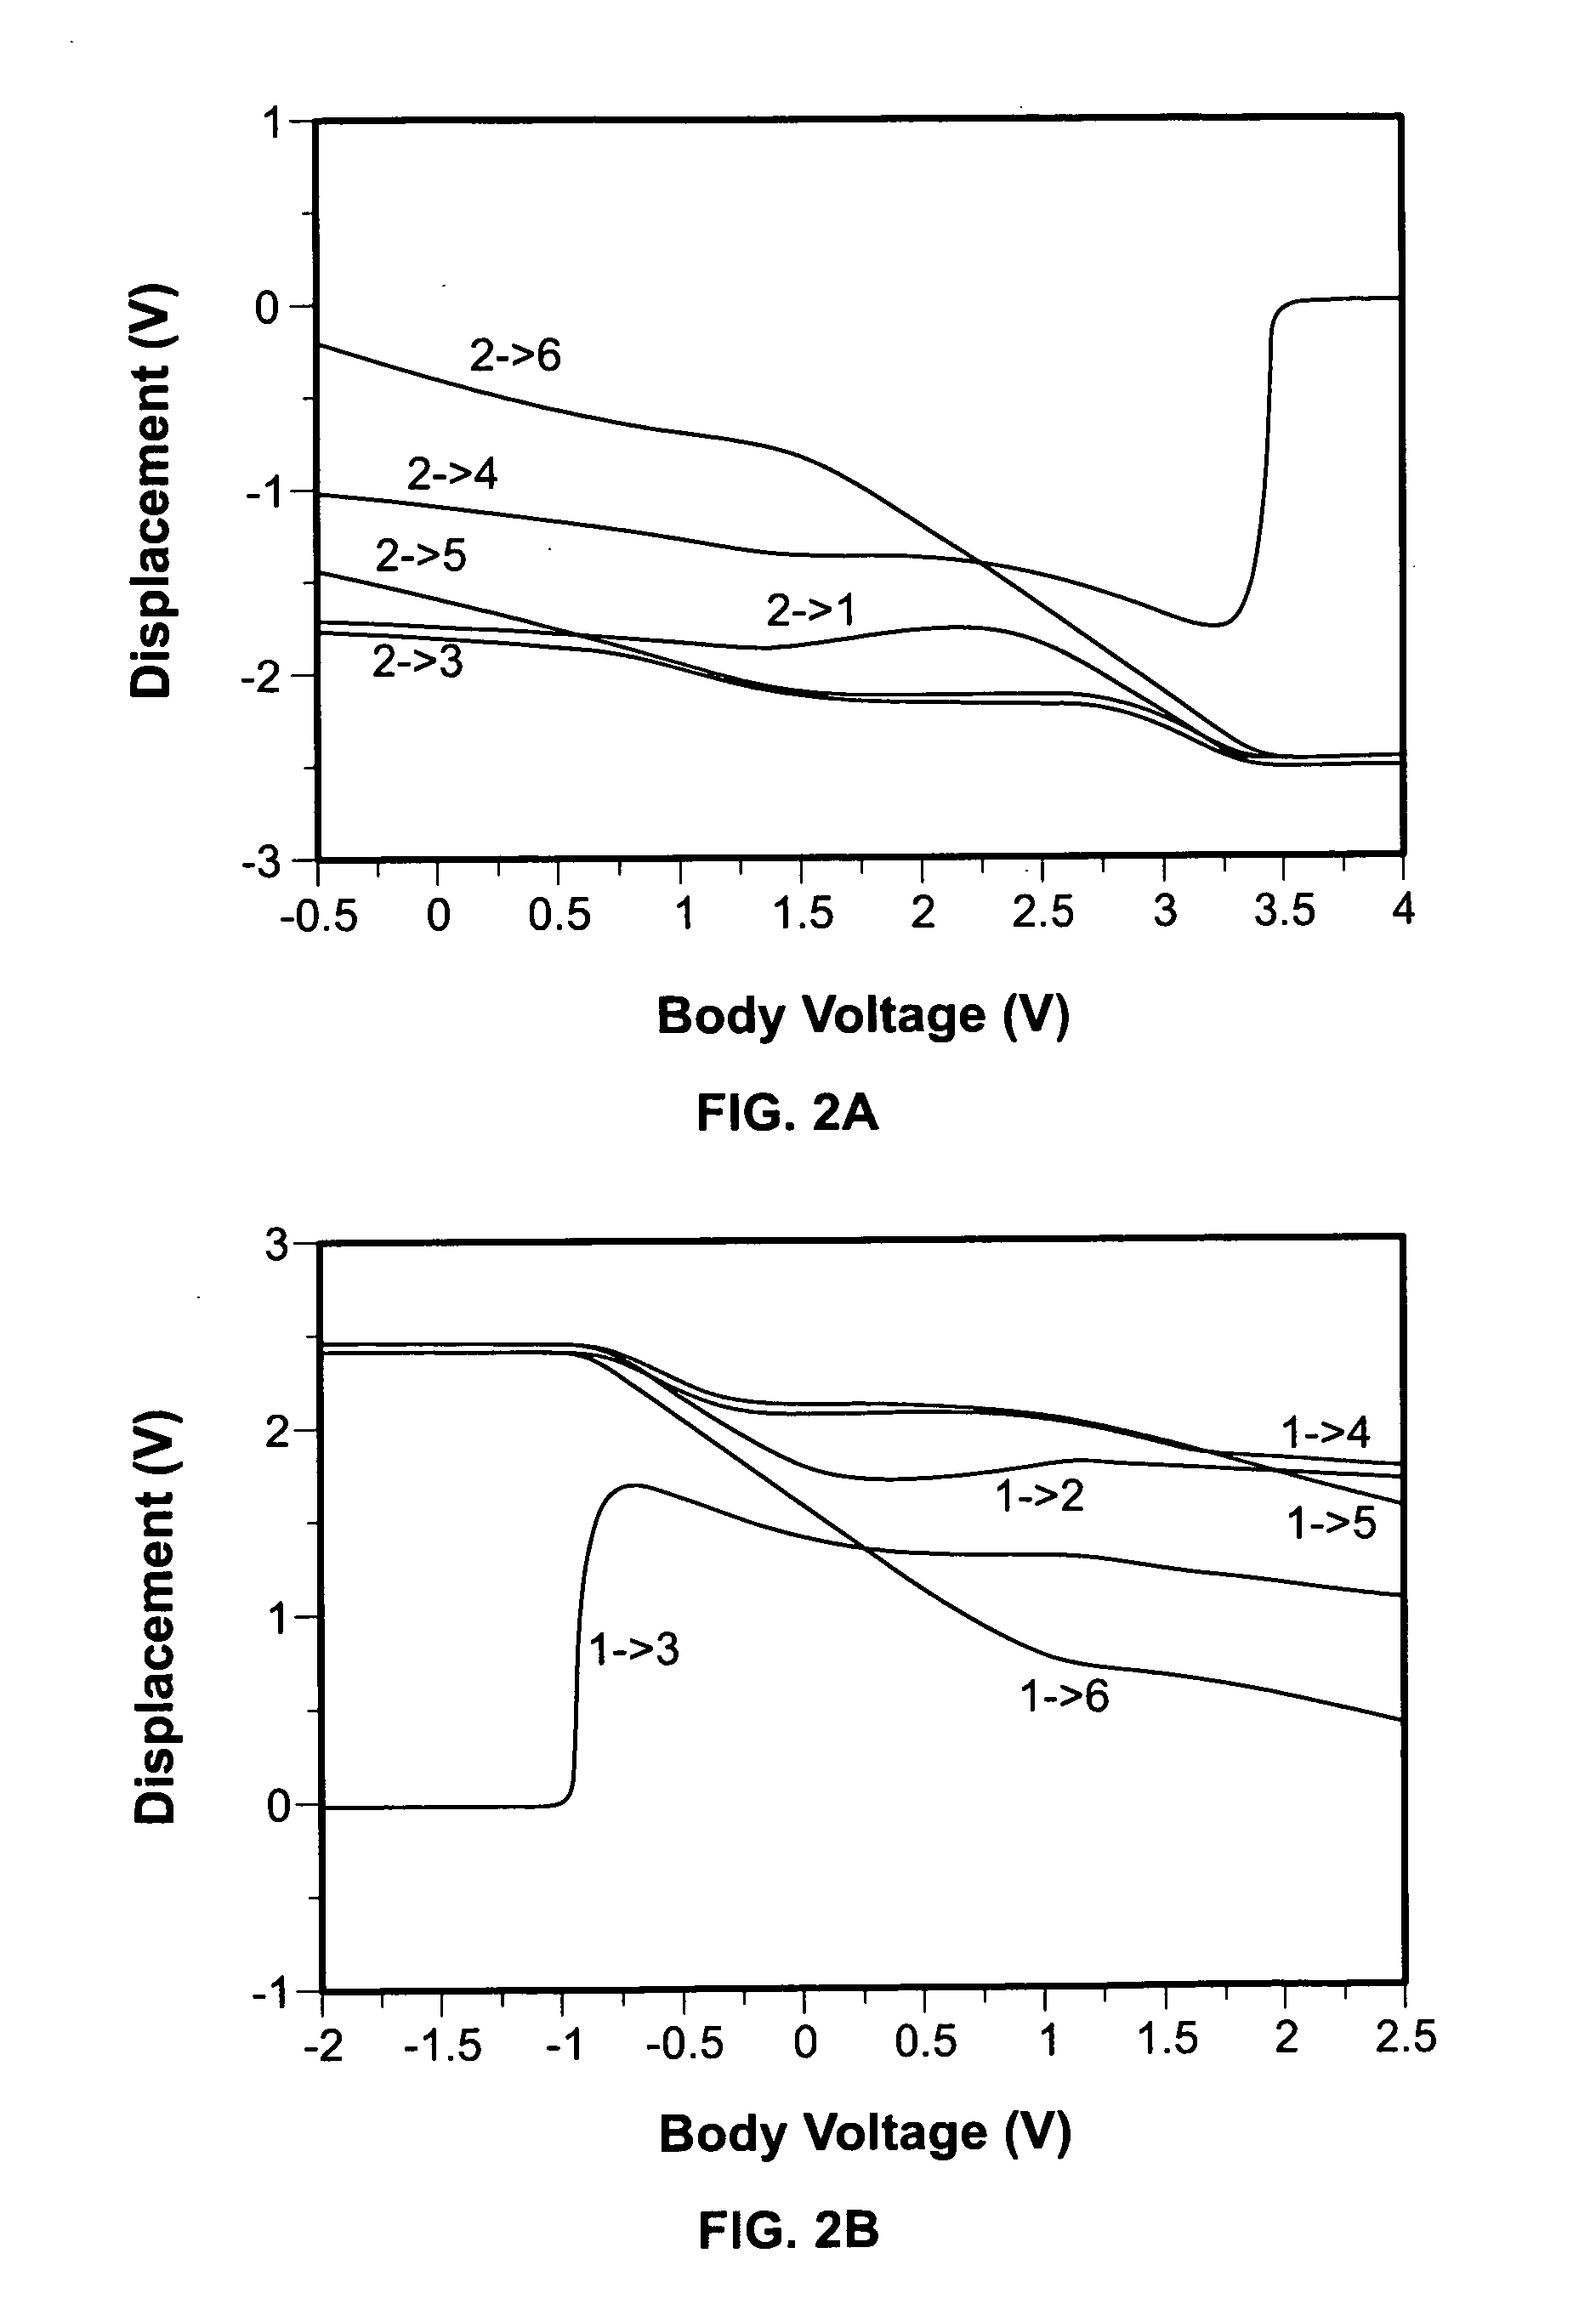 Methods for estimating the body voltage of digital partially depleted silicon-on-insulator circuits